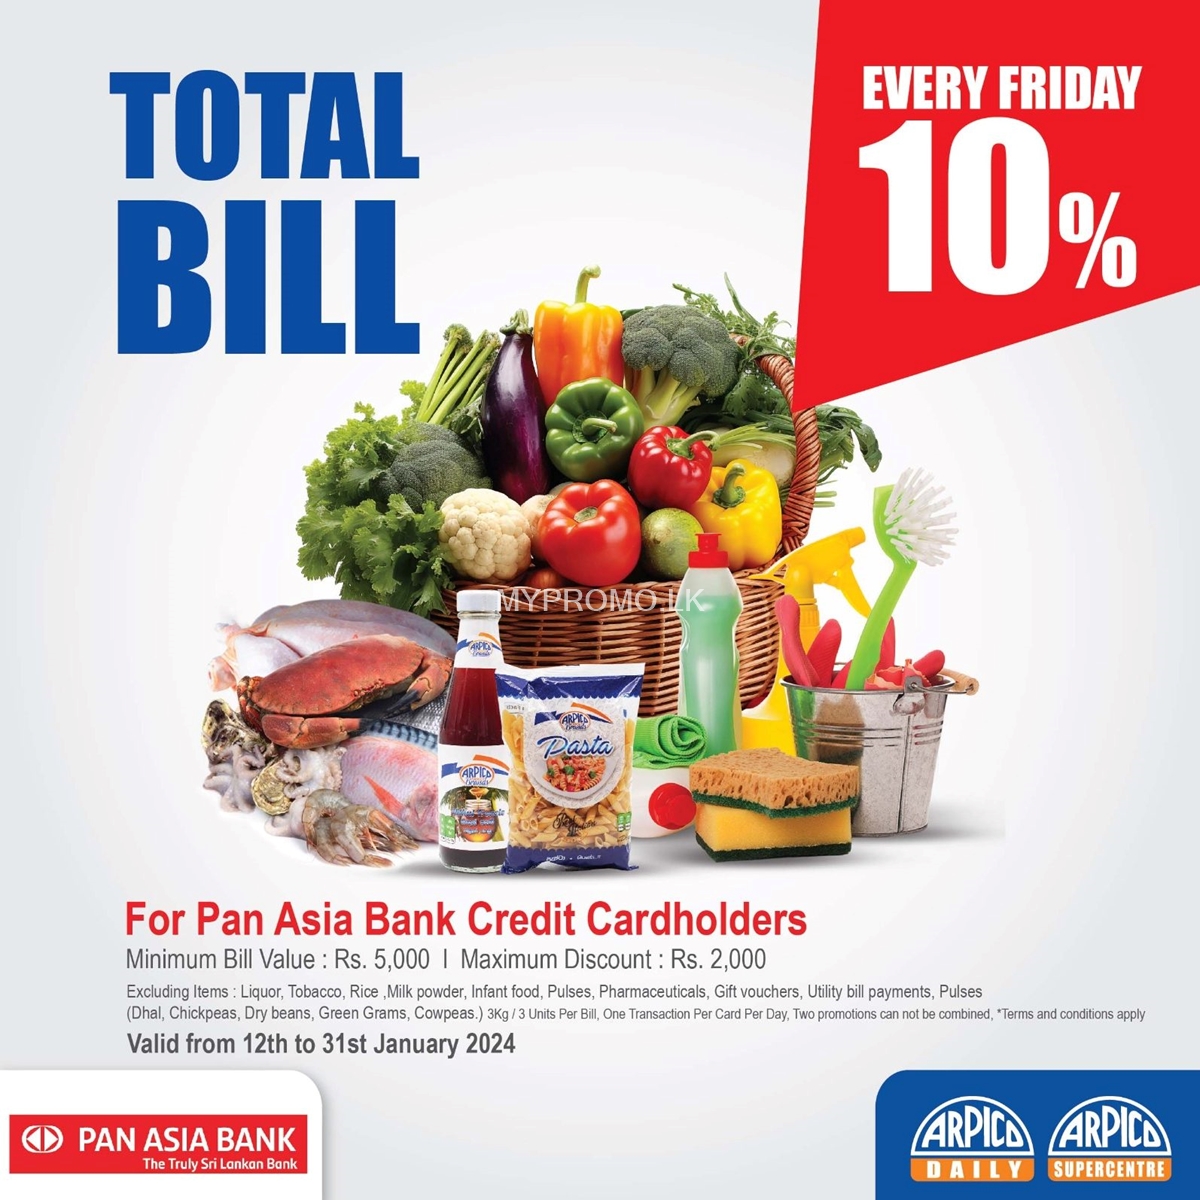 10% off on Total Bill for Pan Asia Ban Credit Cards at Arpico Super Centre